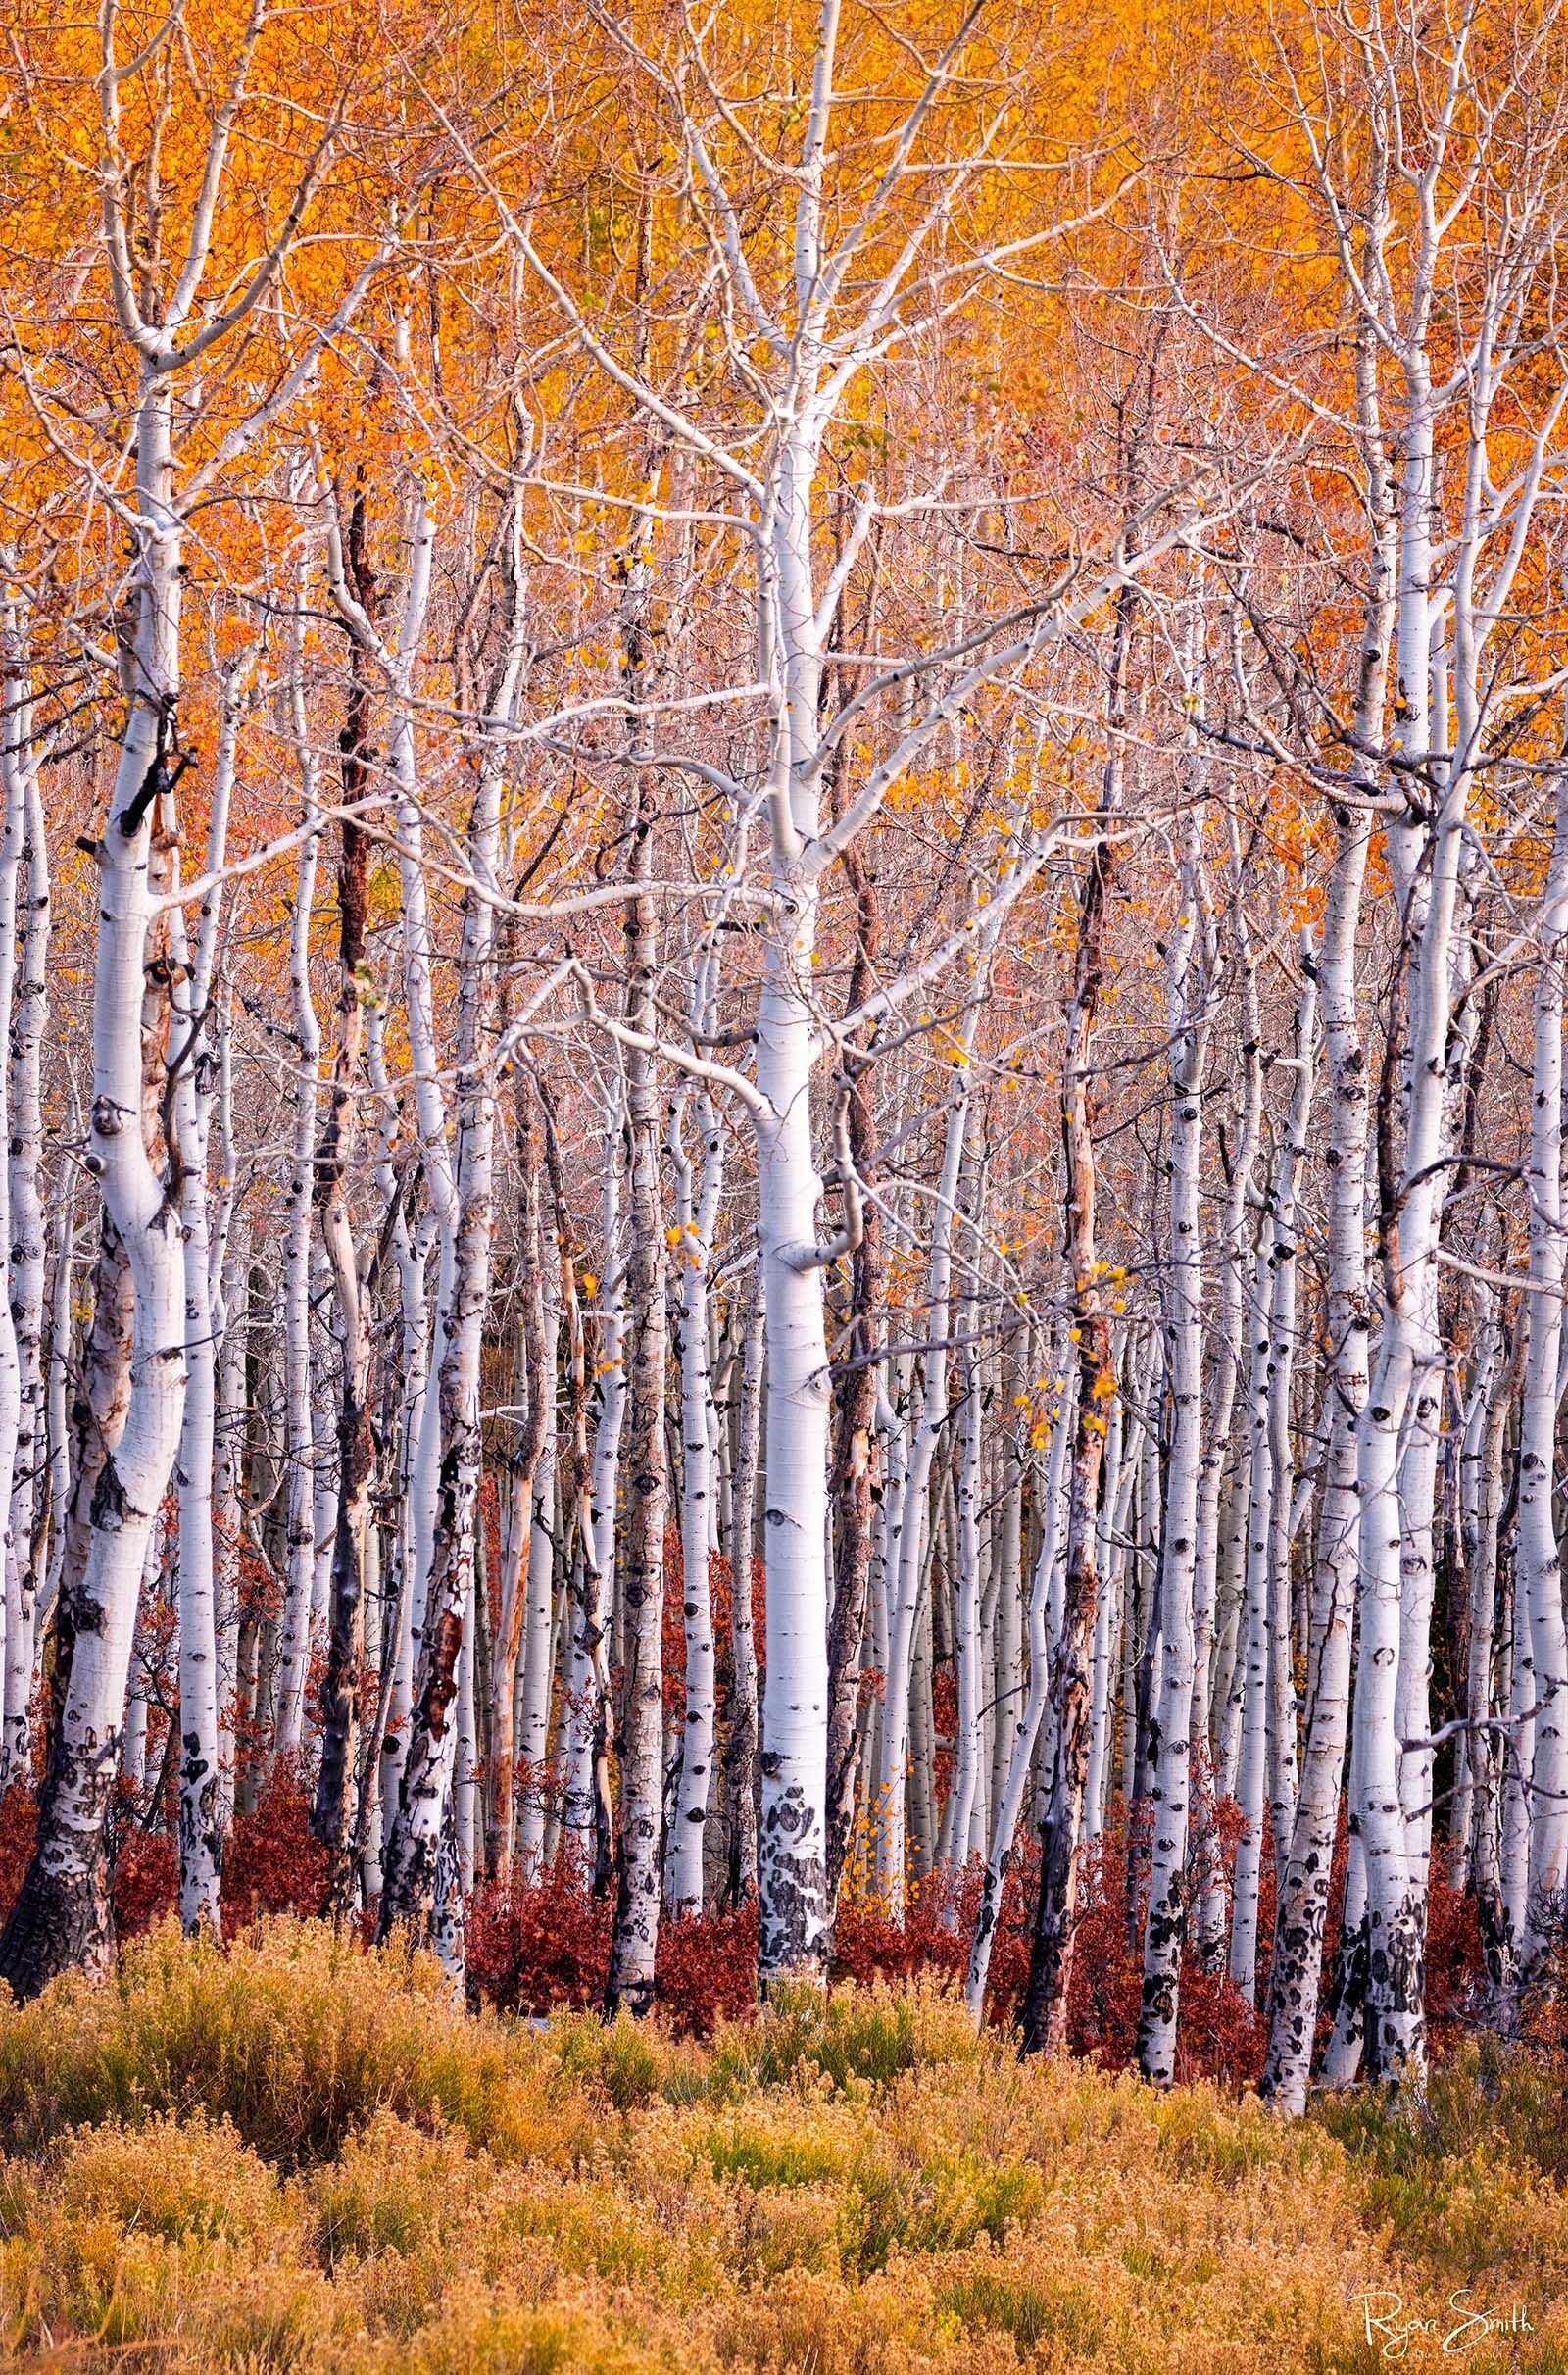 Tall white trunks of aspen trees with bent branches and yellow leaves stand at the edge of a meadow with deep red underbrush and tan grasses in the meadow.